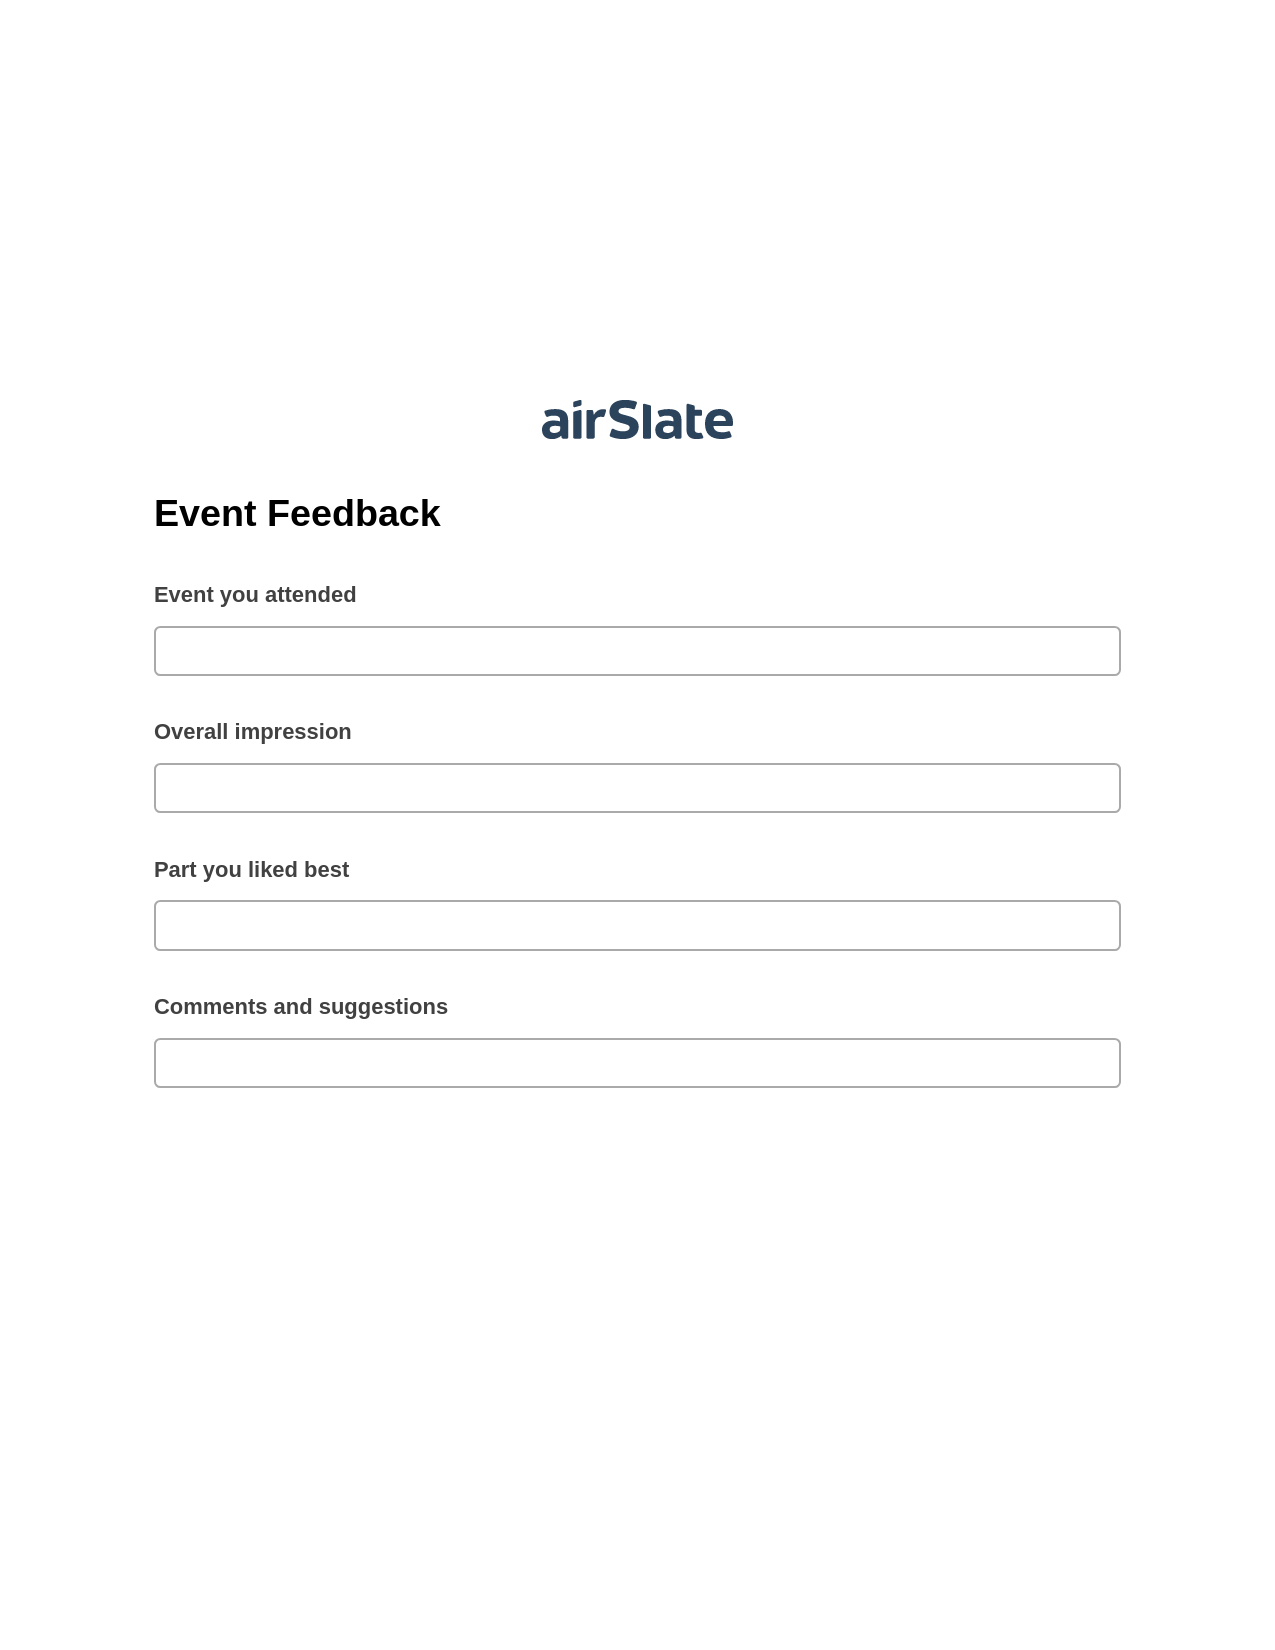 Multirole Event Feedback Pre-fill from NetSuite Records Bot, Lock the slate bot, Export to NetSuite Record Bot